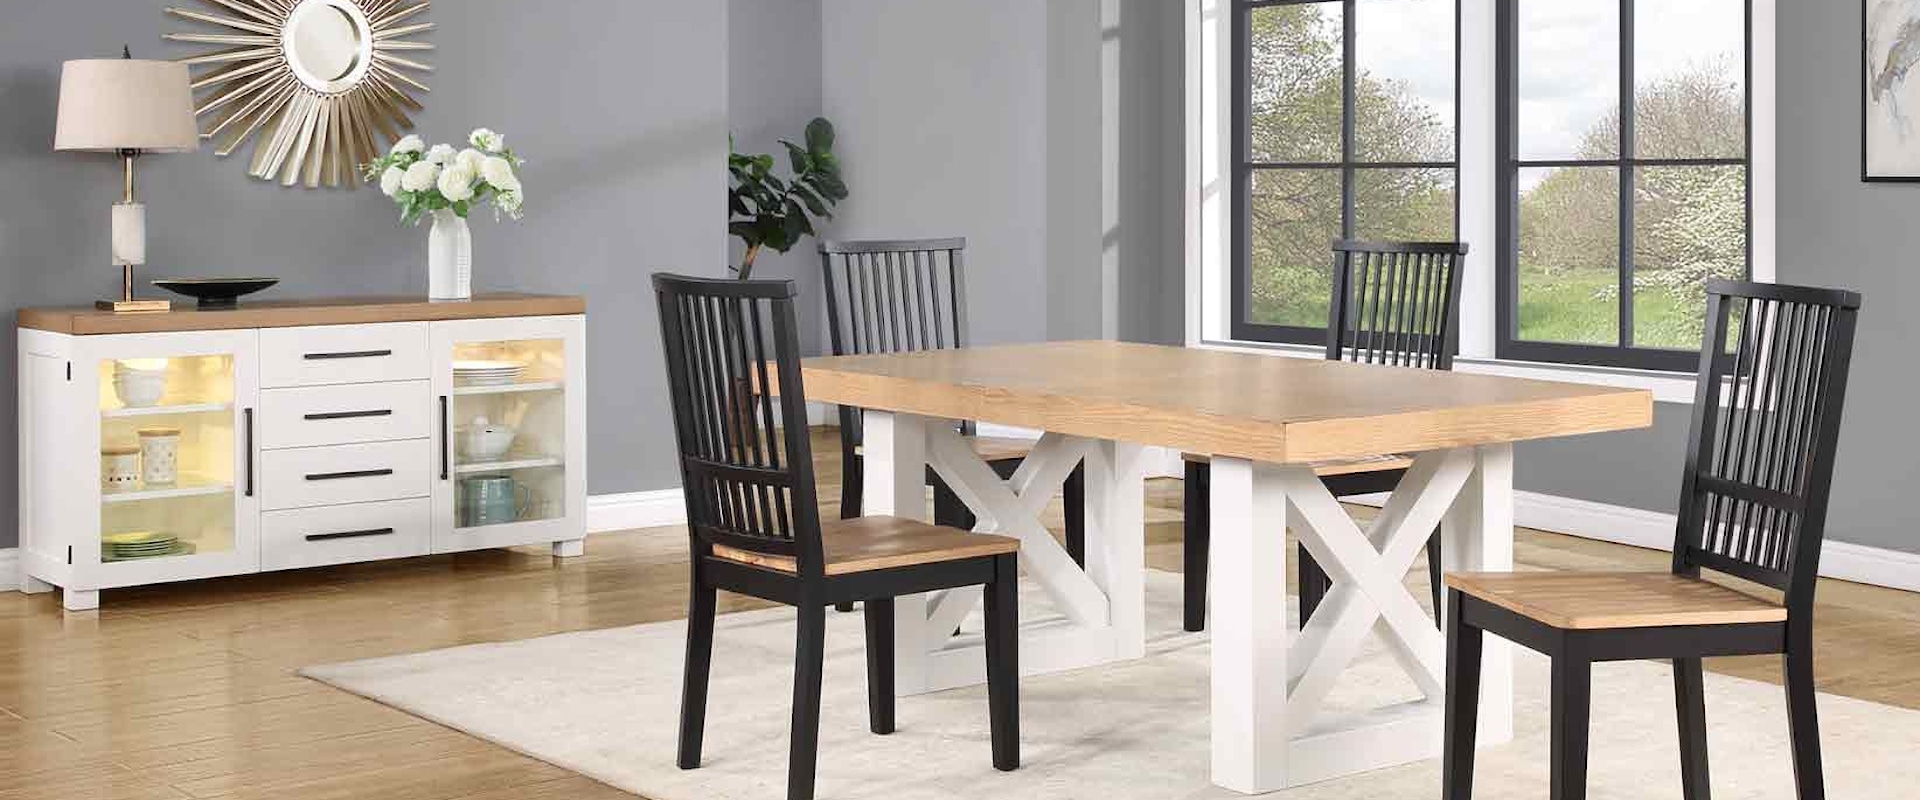 Magnolia Farmhouse 6-Piece Dining Set with Side Chairs and Server